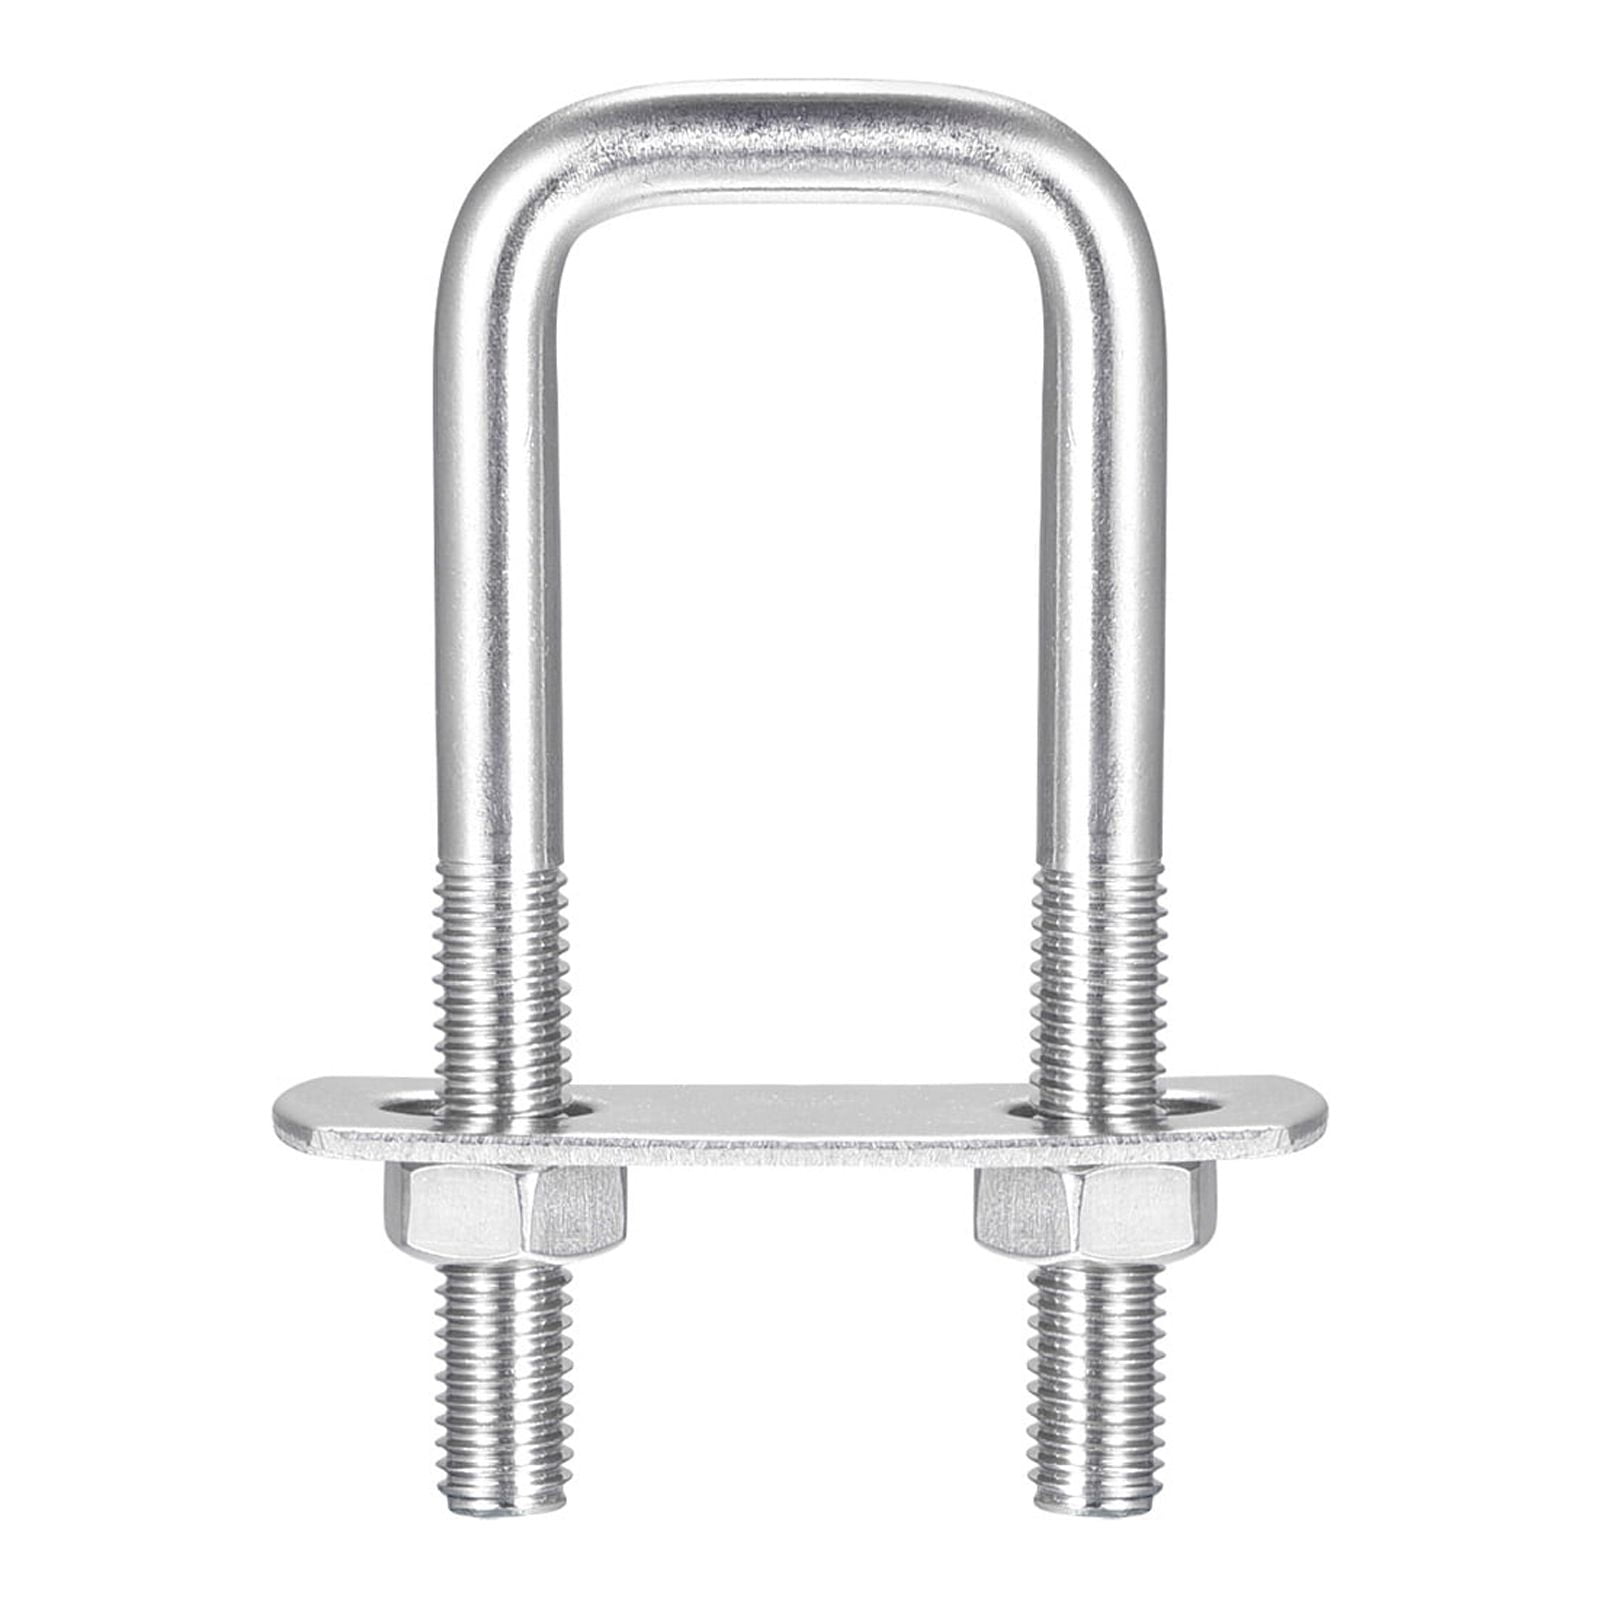 Square U-Bolts Sets 42mm Inner Width 60mm Length M6 304 Stainless Steel  with Nuts and Plates